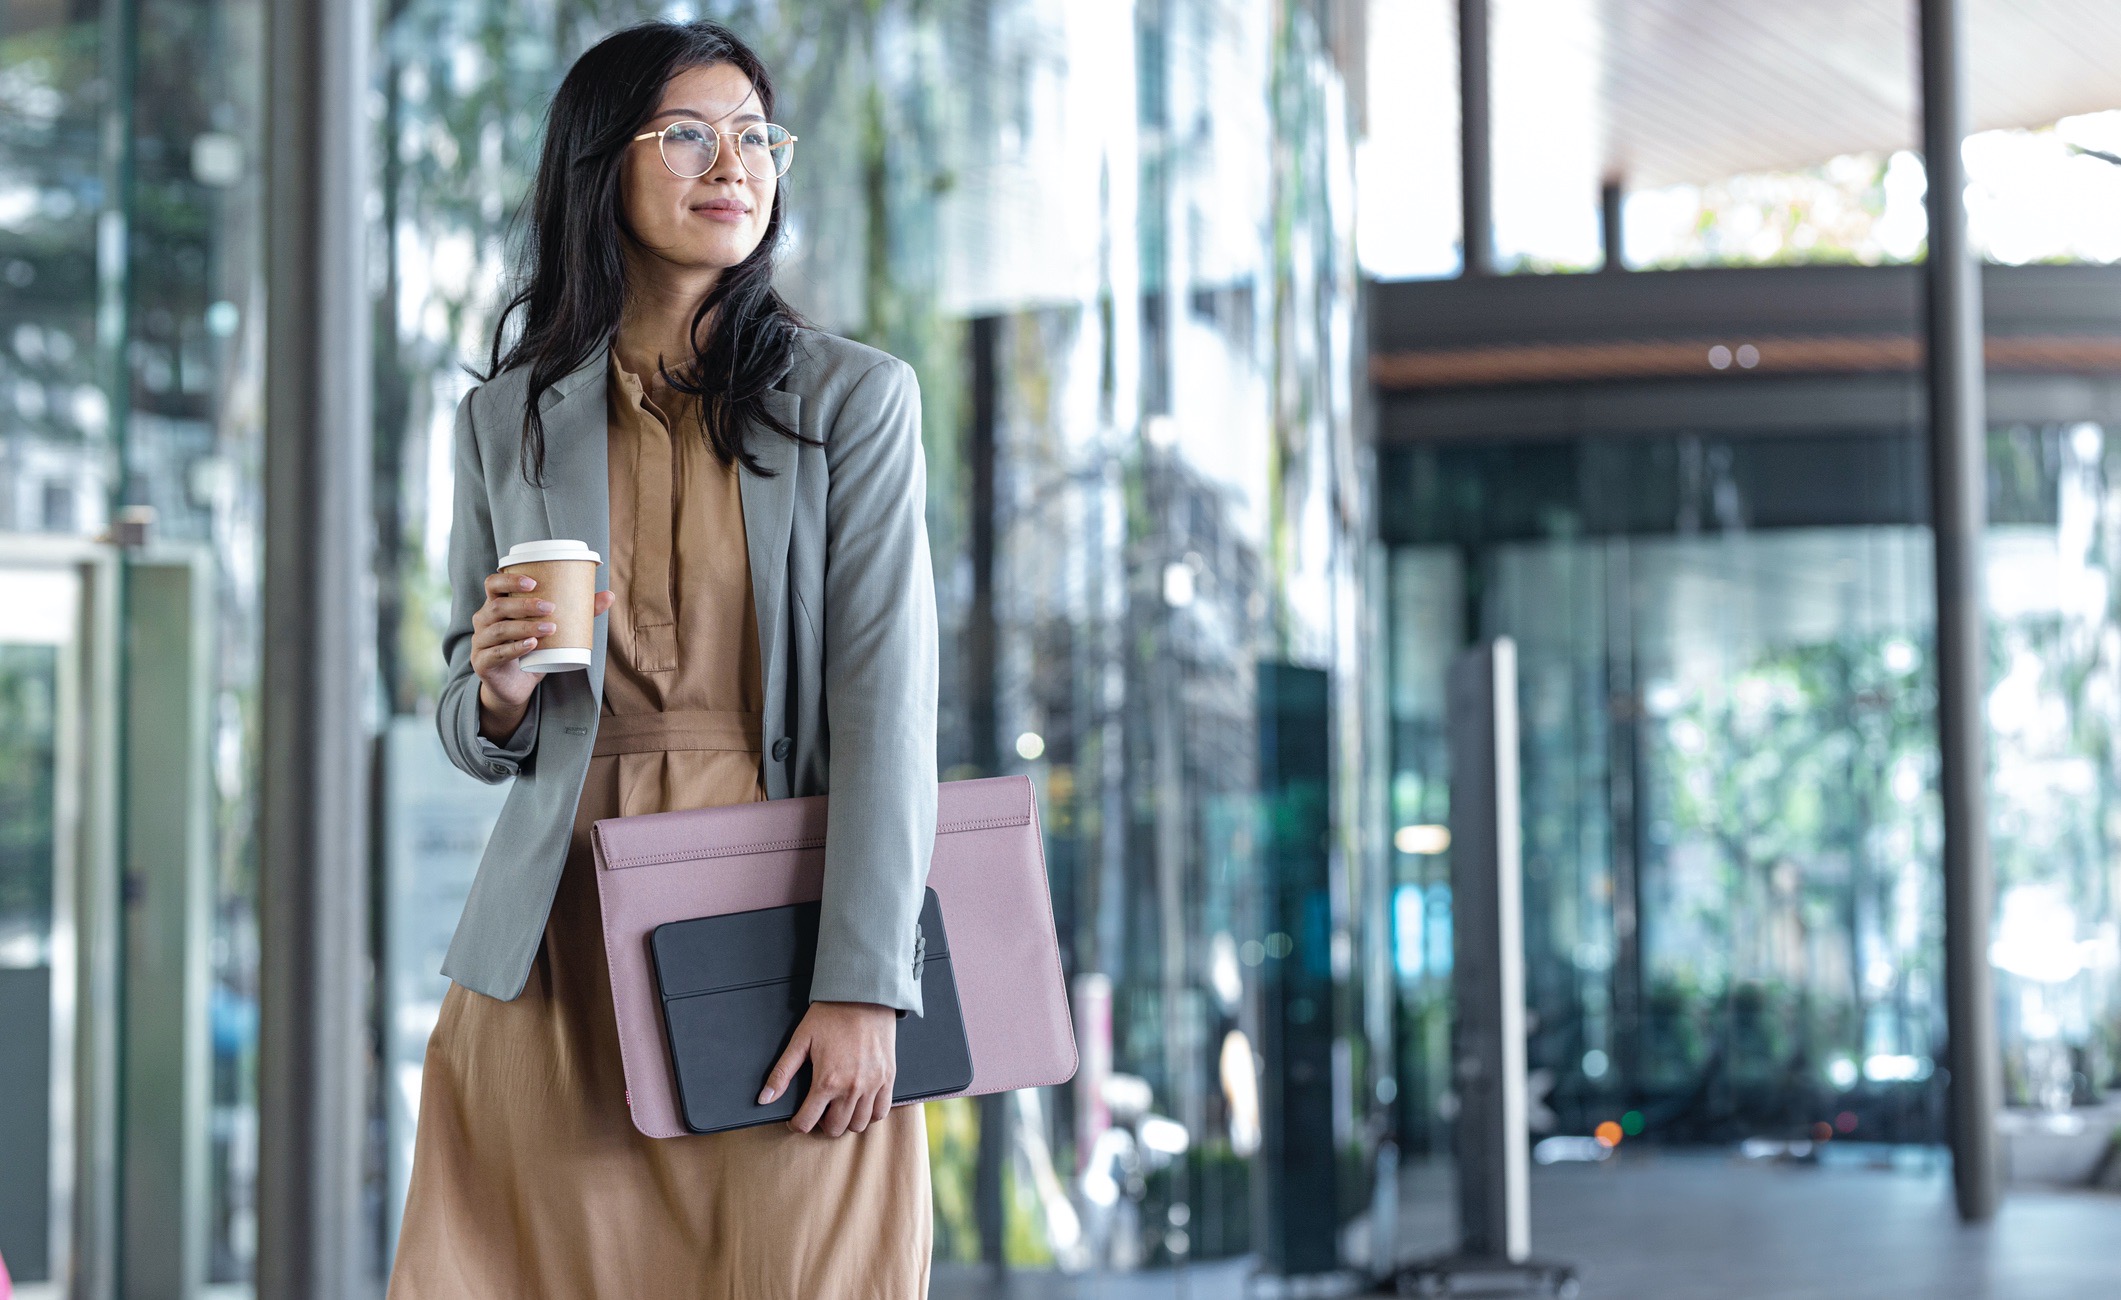 Outdoor shot of a smiling businesswoman holding coffee and files.